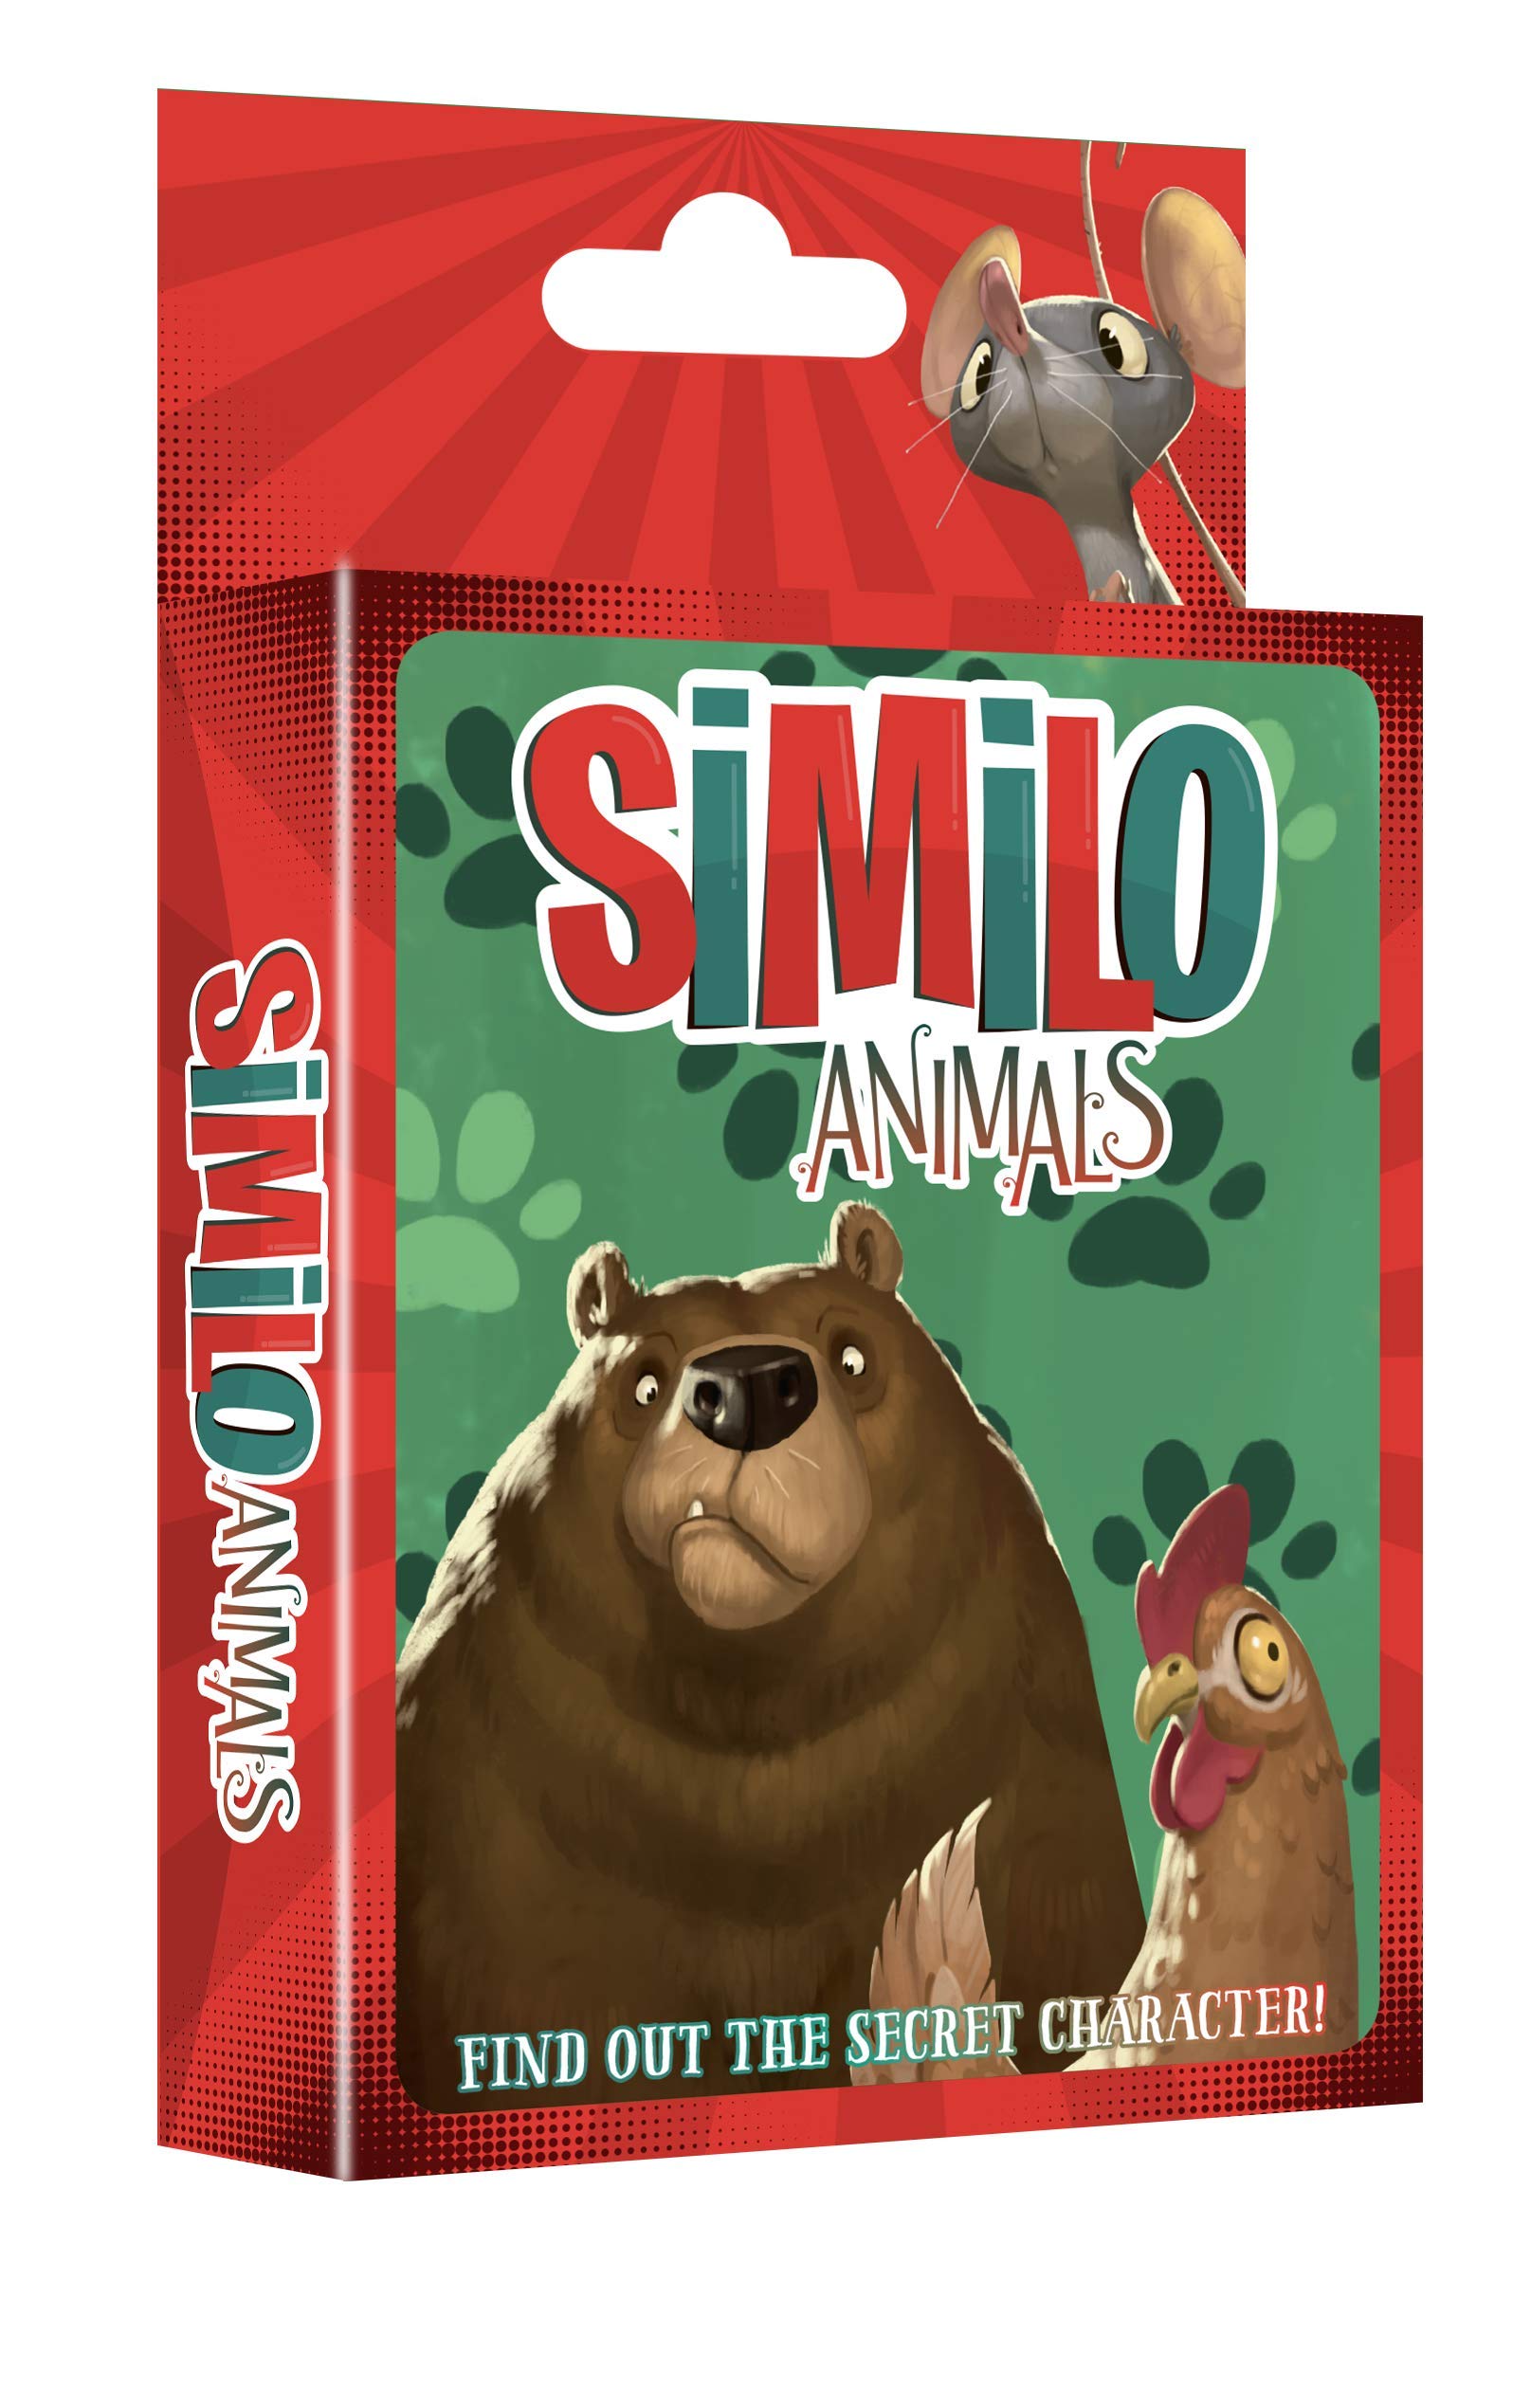 Horrible Guild Similo Animals: A Fast Playing Family Card Game - Guess the Secret Animal Character, 1 Player is the Clue Giver & Others Must Guess the Character, 2-8 Players, Ages 8+, 20 min